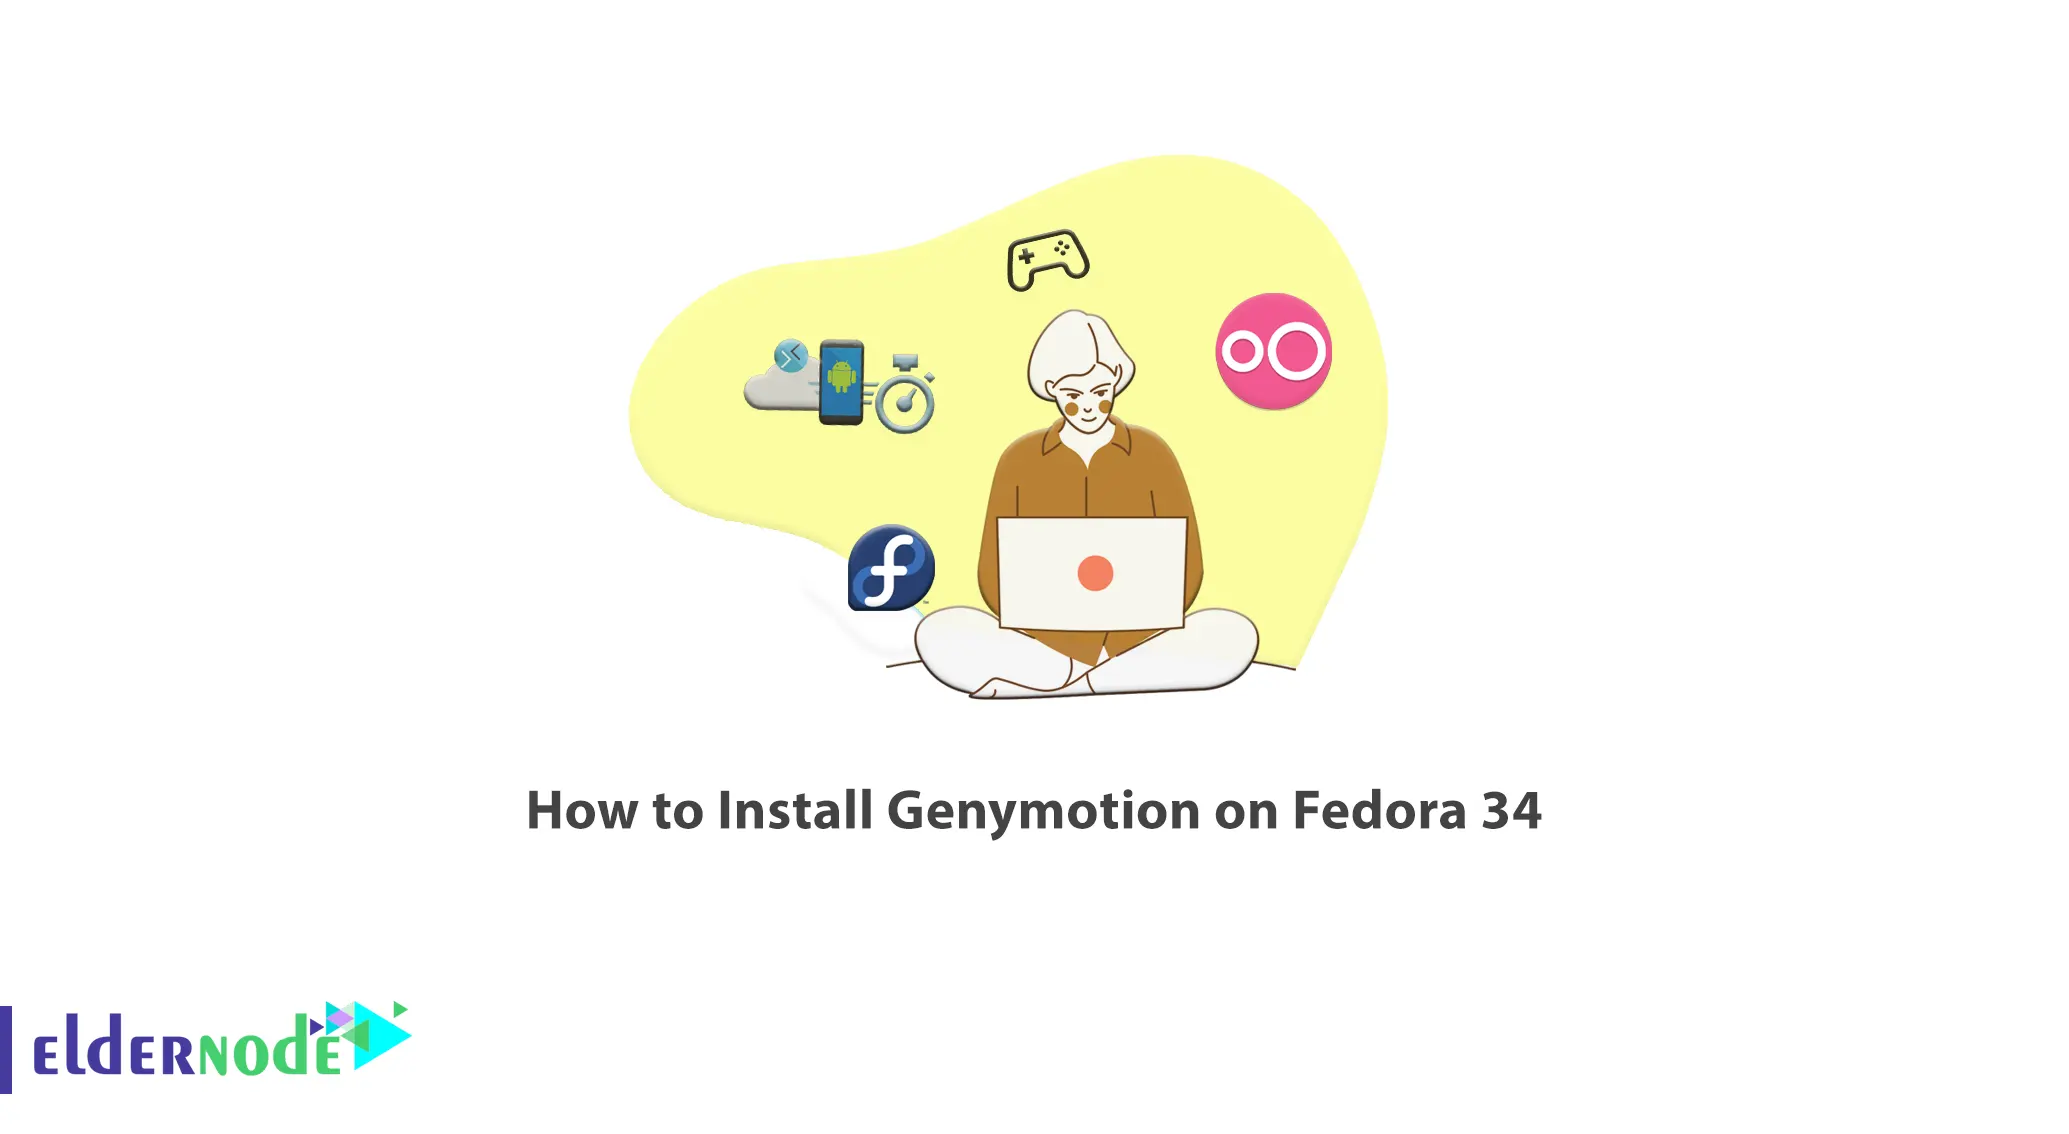 How to install Genymotion on Fedora 34